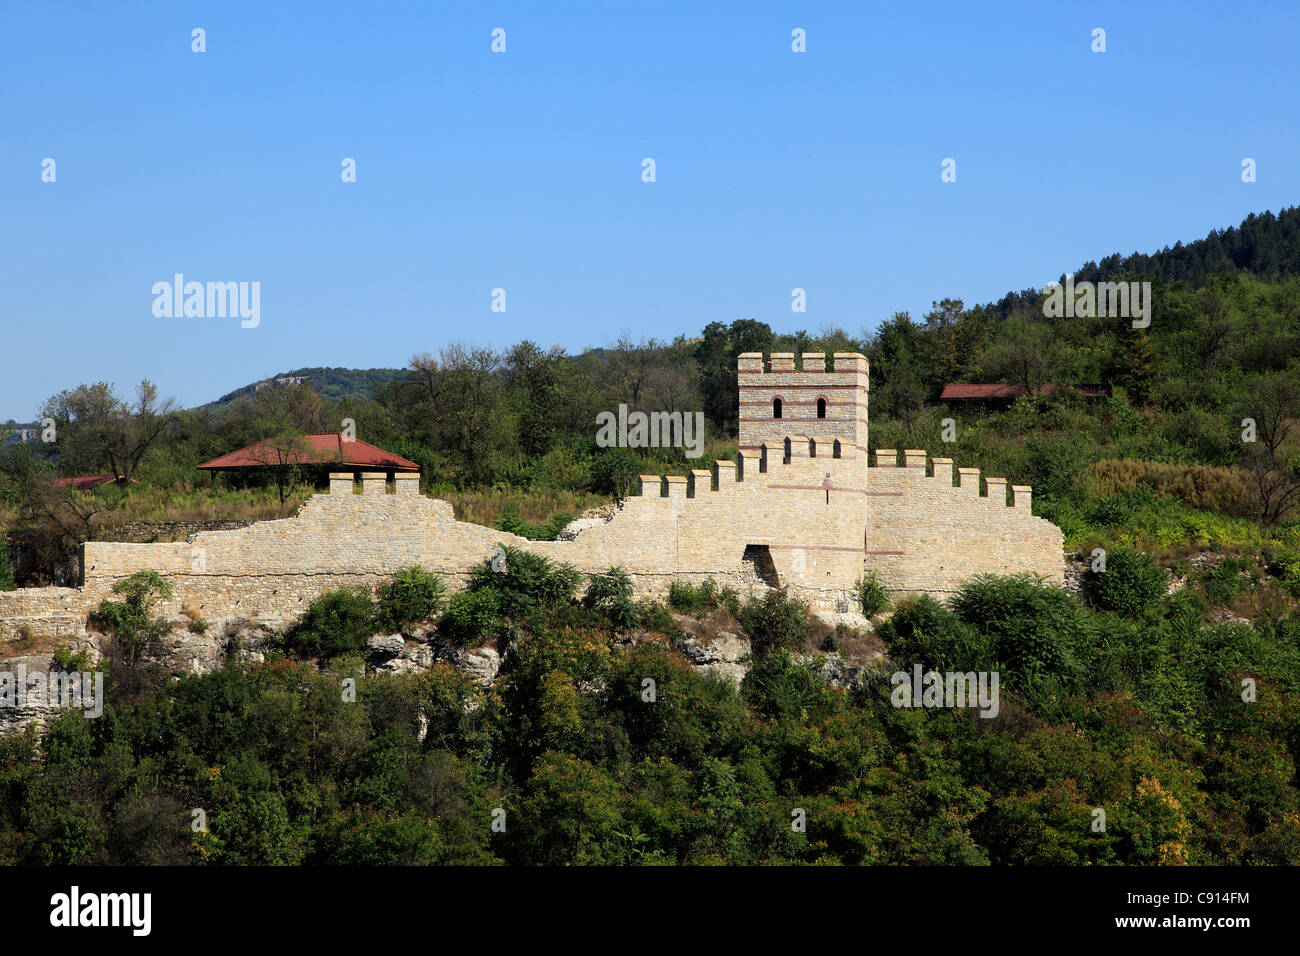 Veliko Tarnovo is the former Bulgarian capital city and the castle of Tsavarets has been reconstructed on the hilltop above the Stock Photo